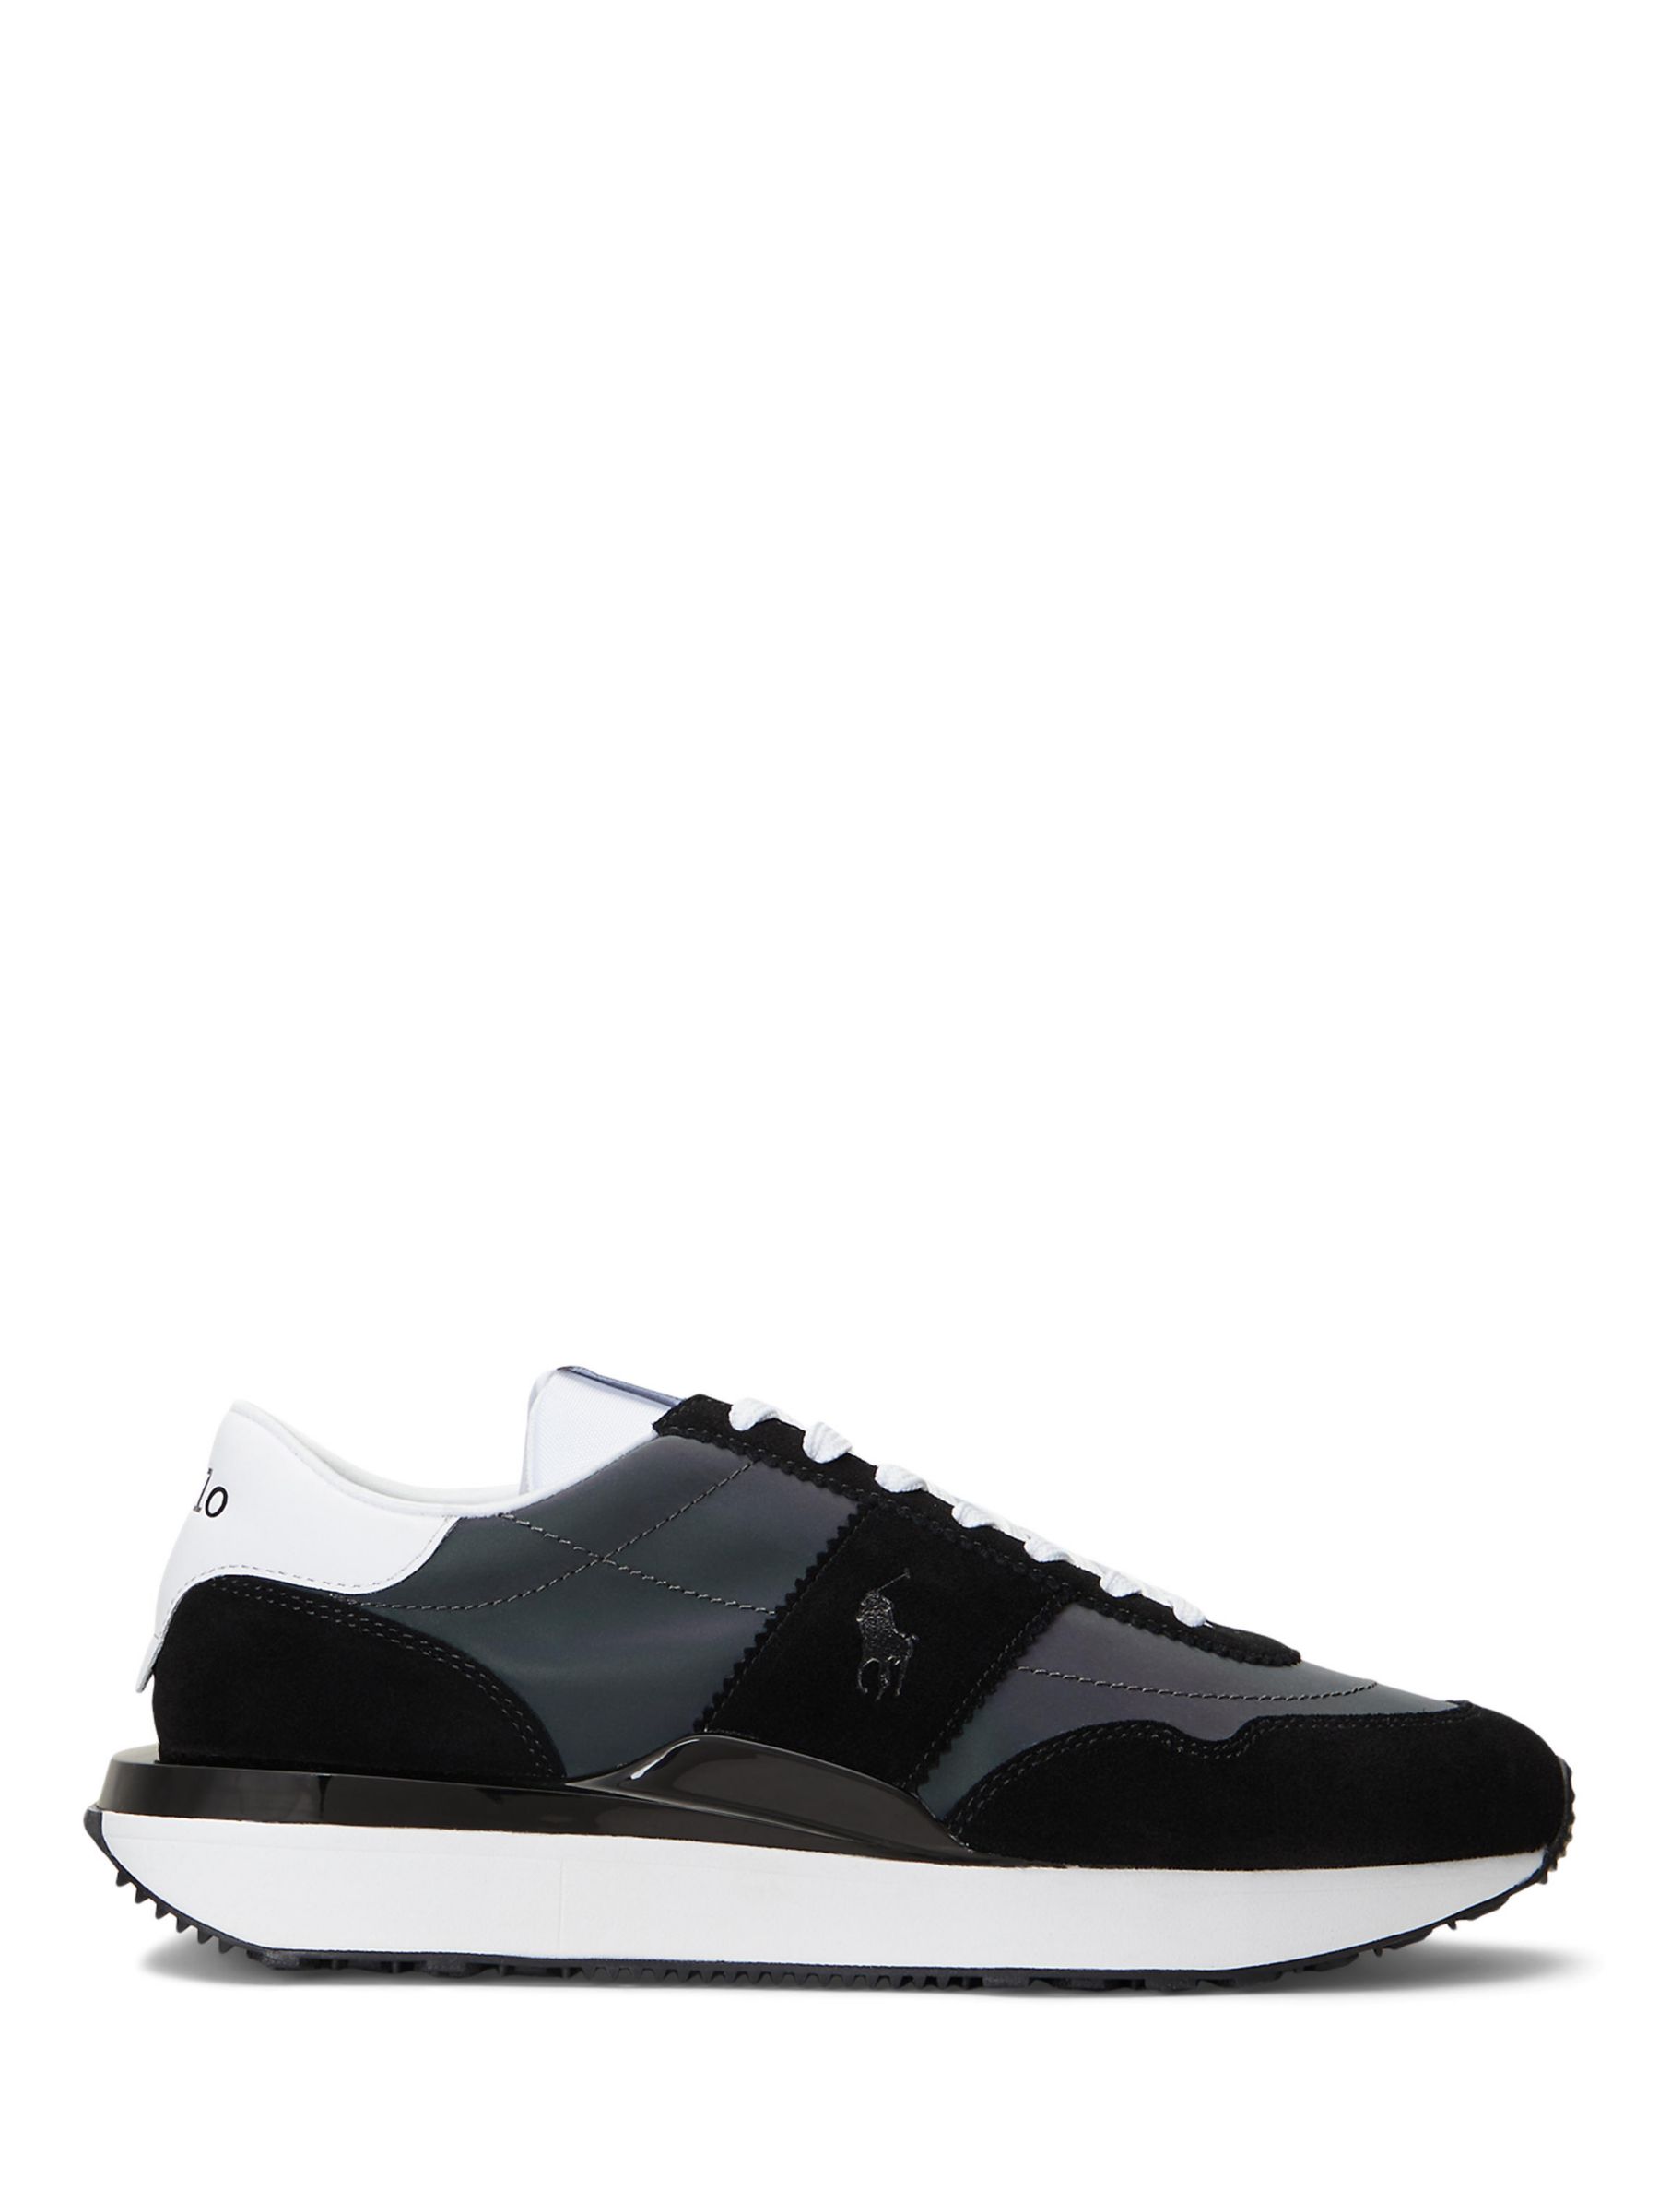 Polo Ralph Lauren Train 89 Suede Trainers, Black Reflective at John ...